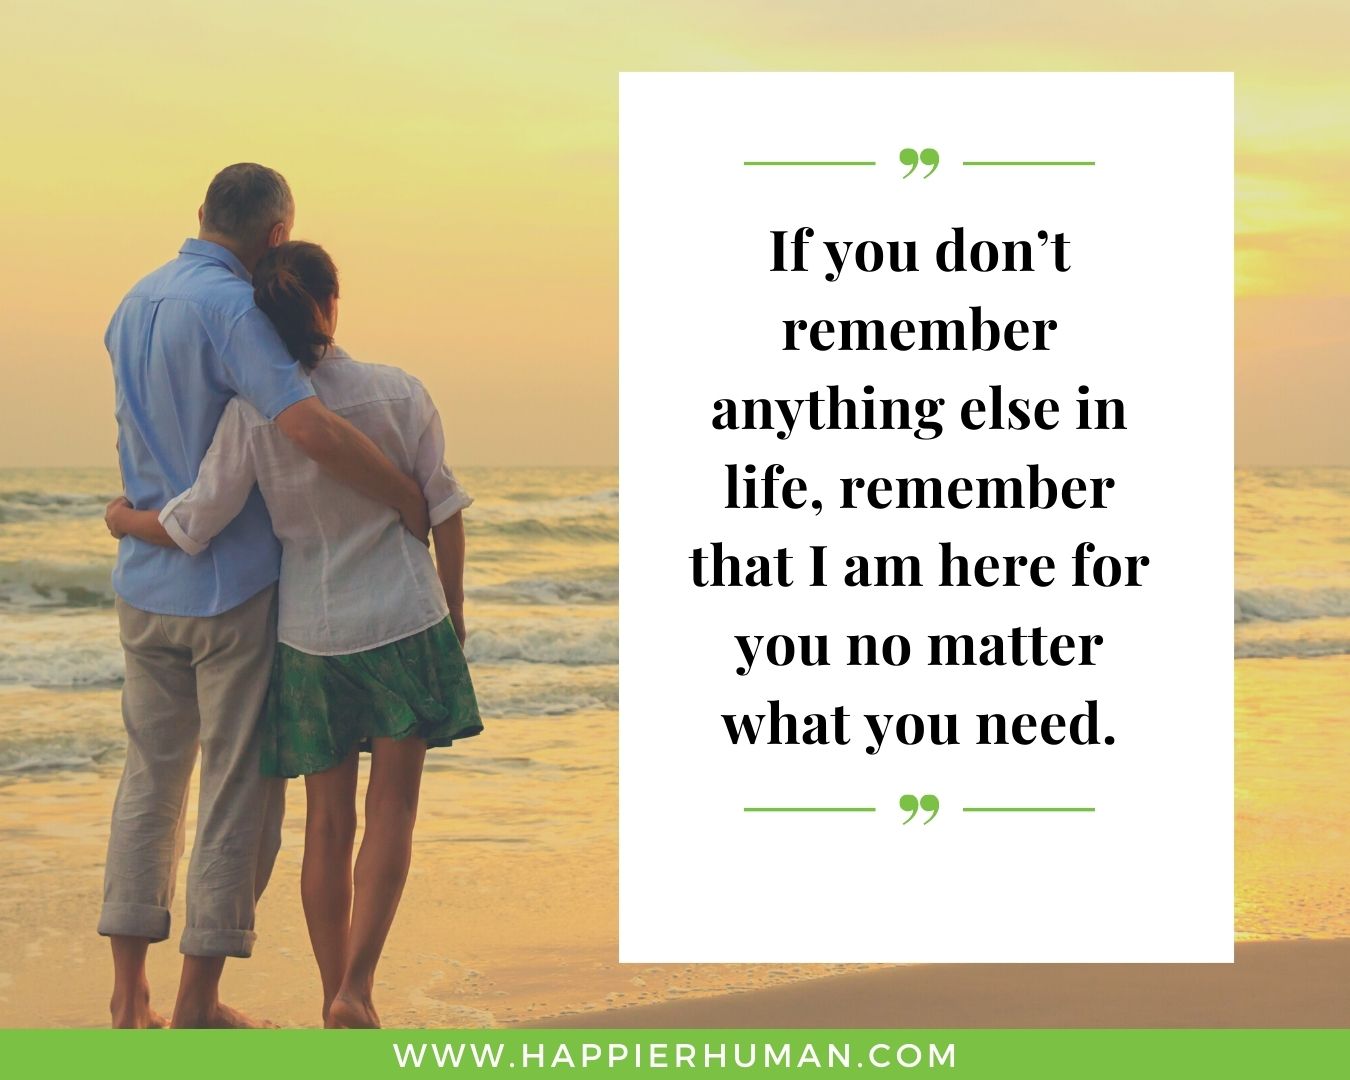 I’m Here for You Quotes - “If you don’t remember anything else in life, remember that I am here for you no matter what you need.”